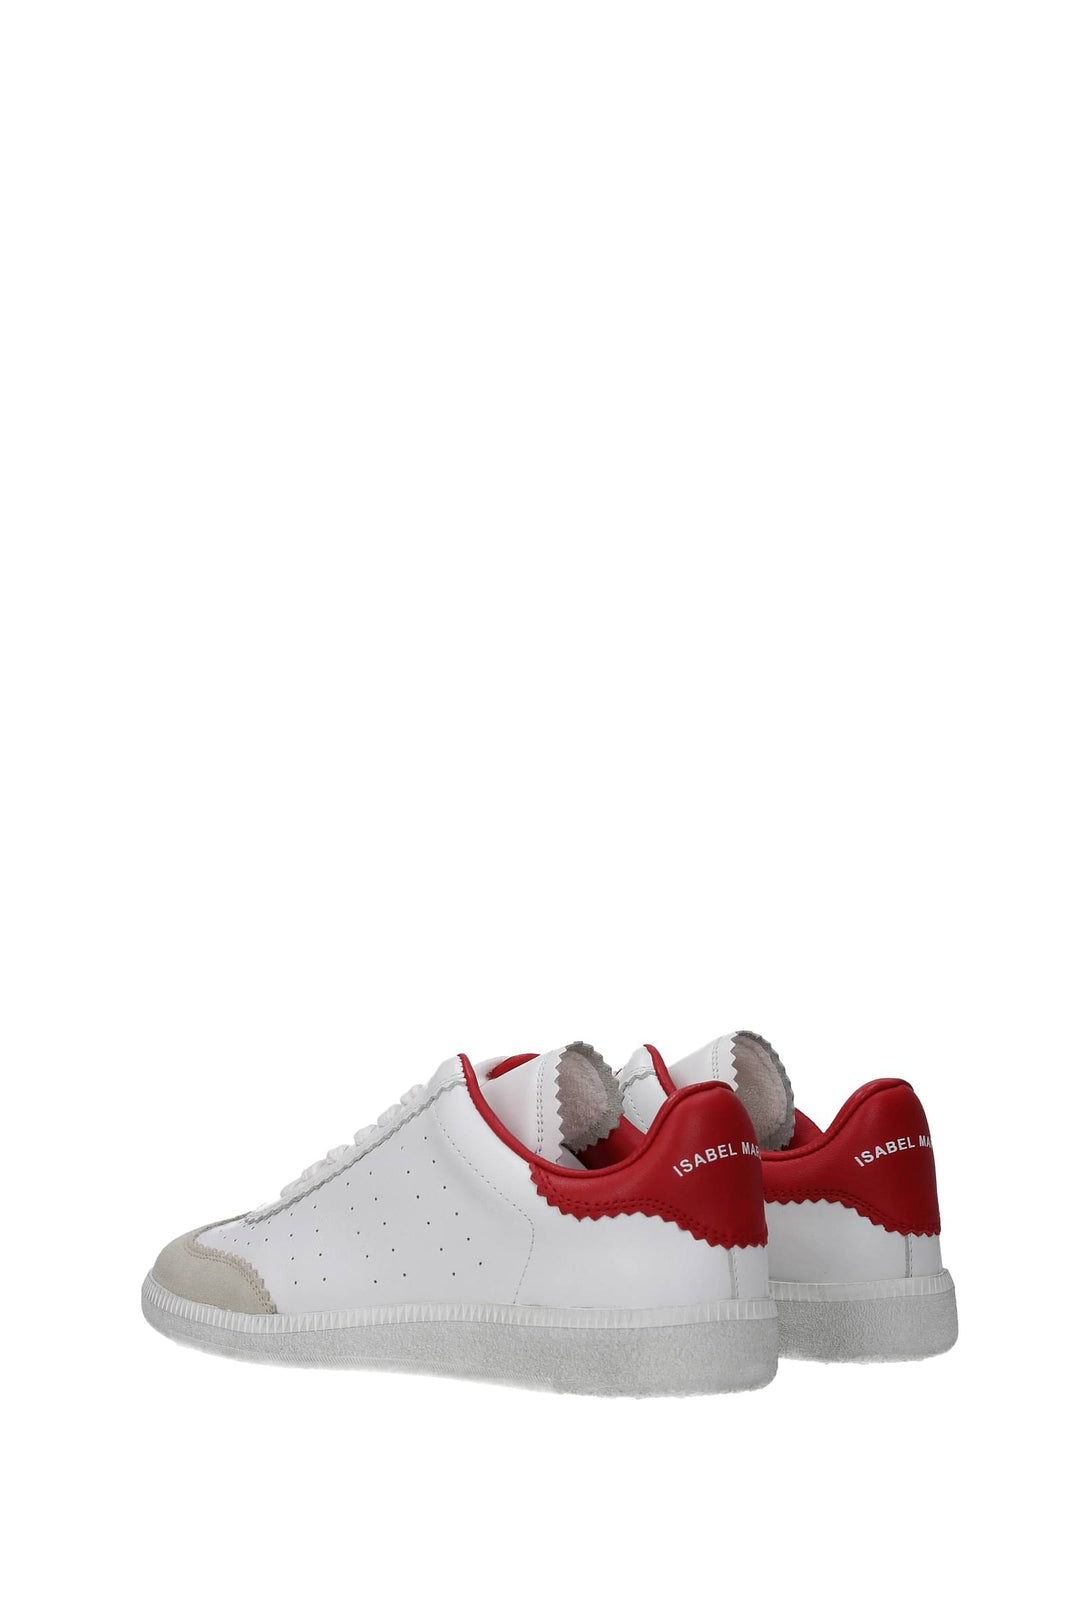 Sneakers Bryce Pelle Bianco Rosso - Isabel Marant - Donna